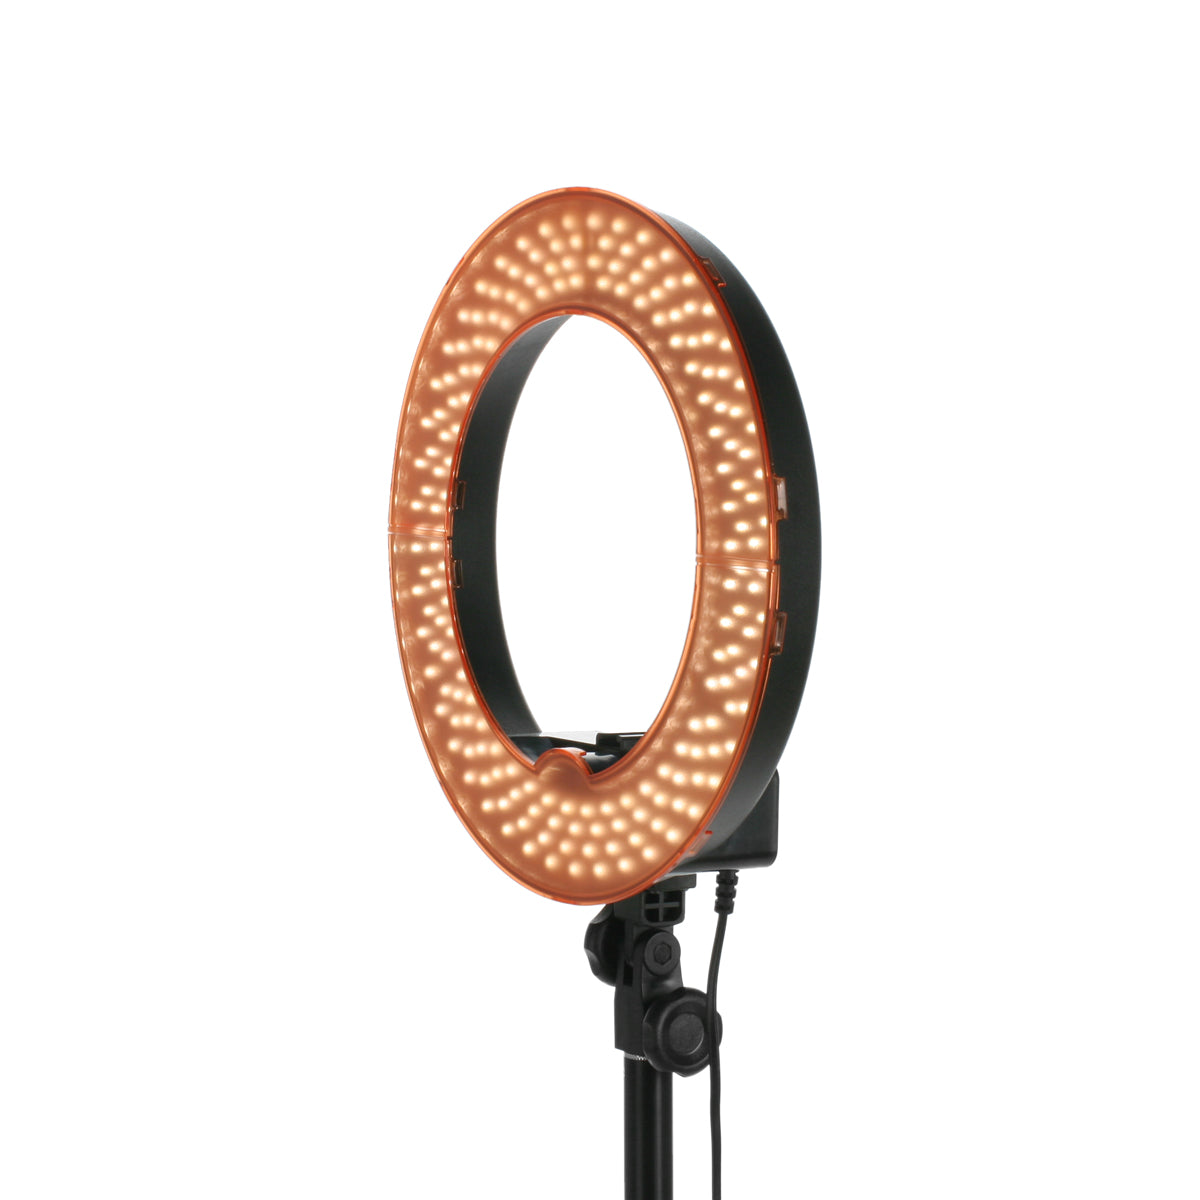 Smith-Victor LED Ring Light (13.5”)